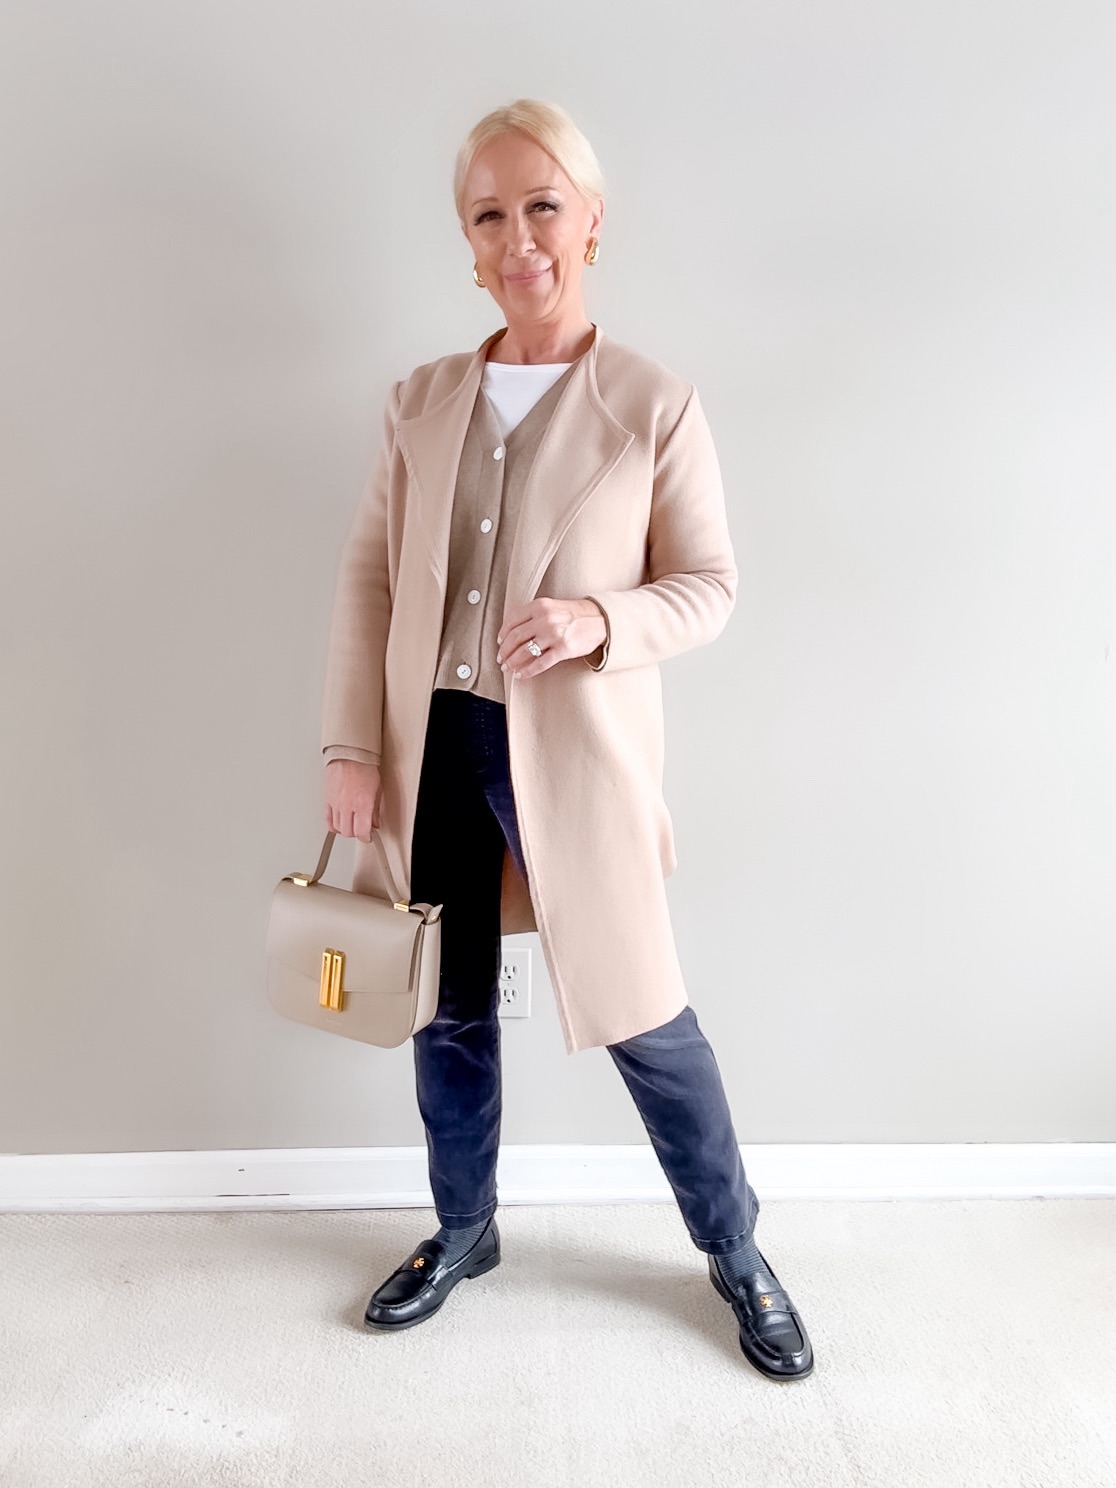 How to make winter outfits look pulled together - Midlifechic